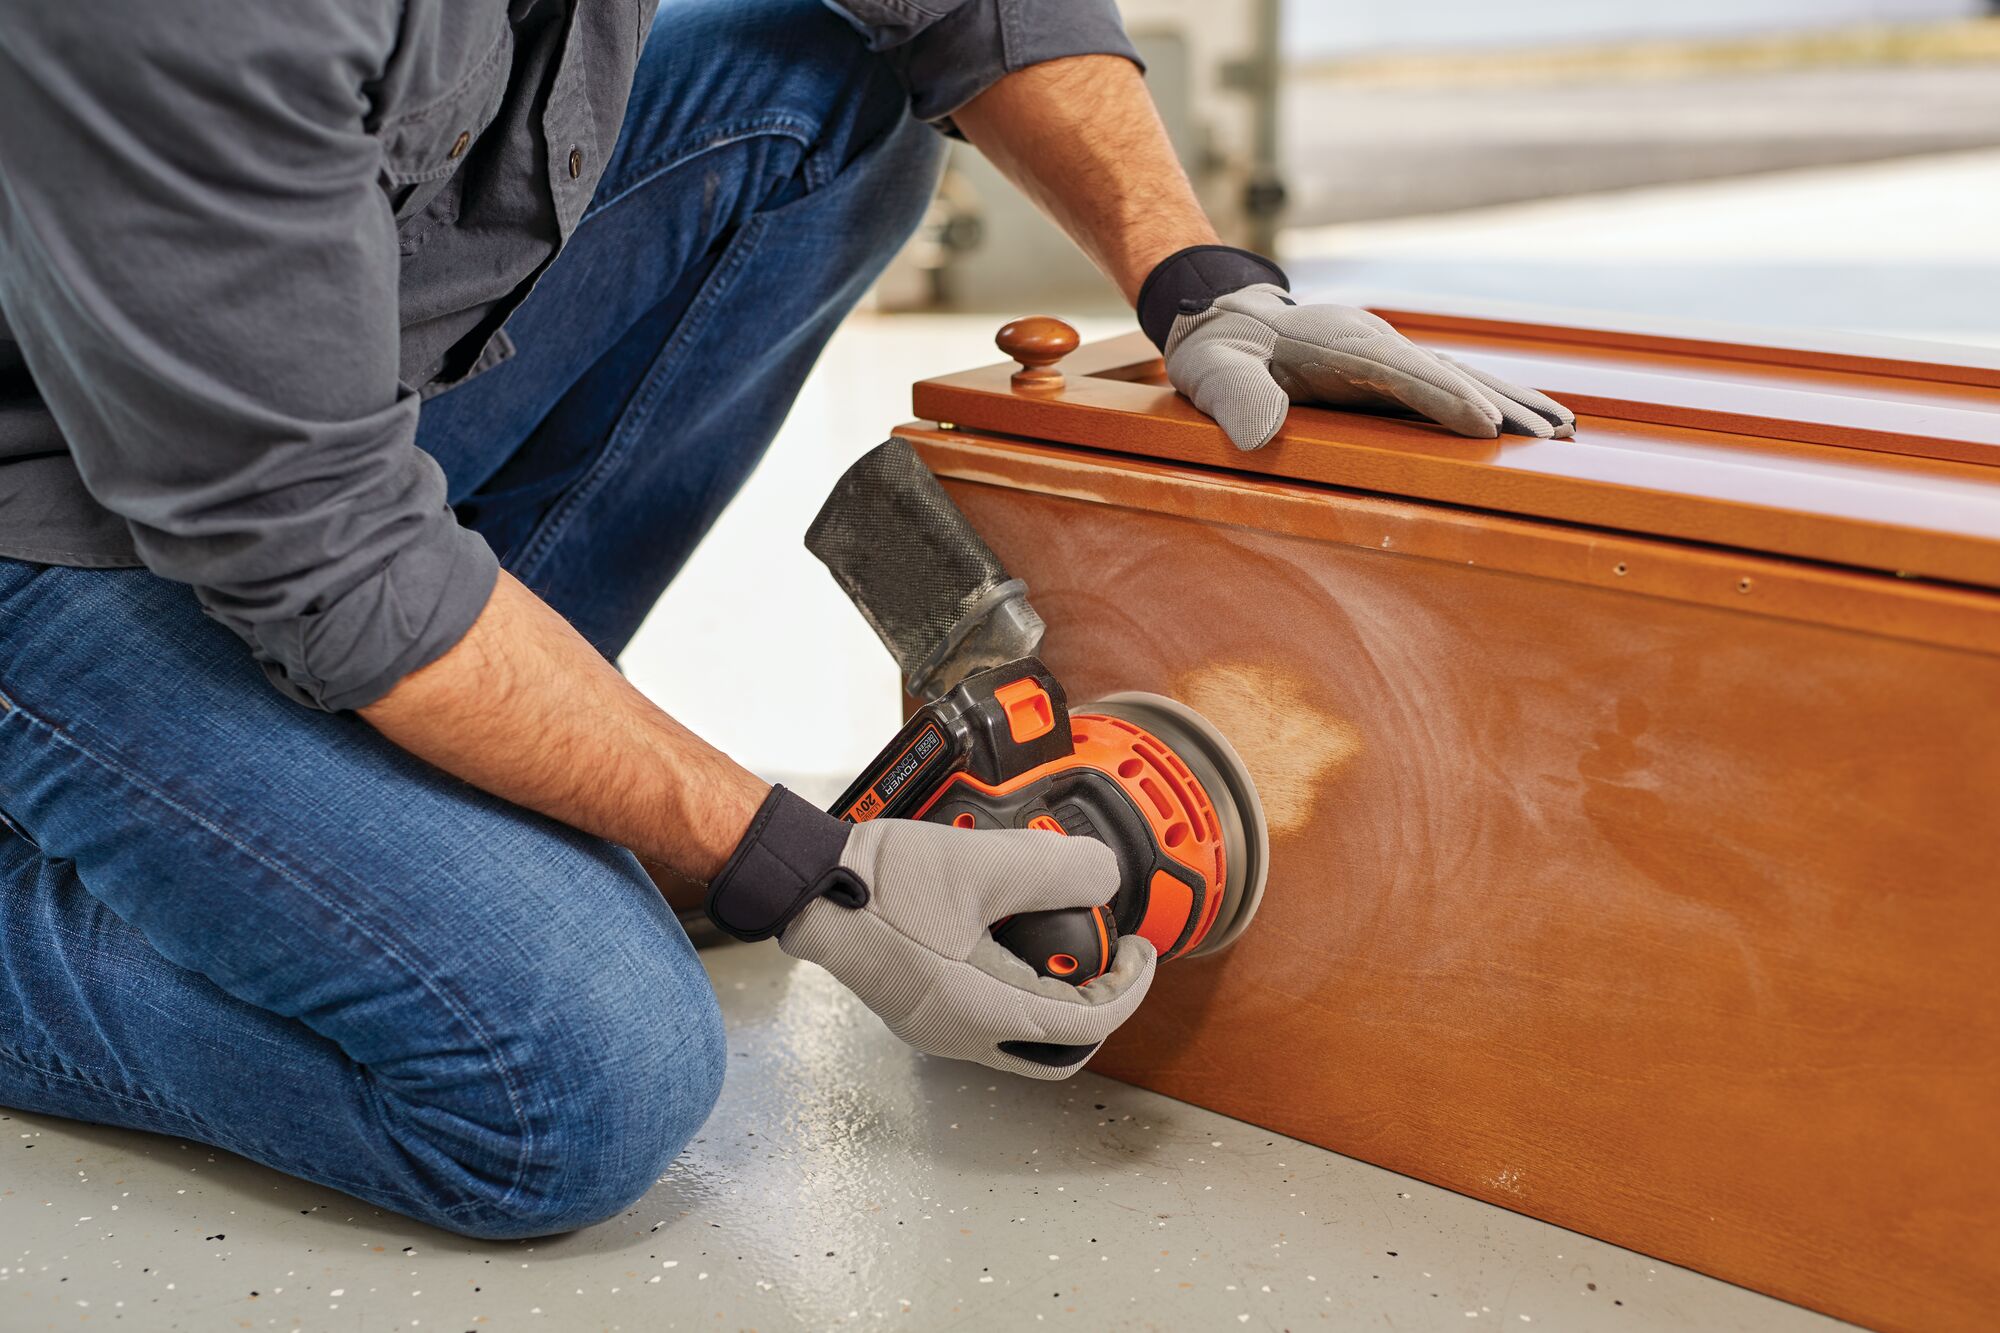 Cordless Random Orbital Sander being used to sand wooden structure.